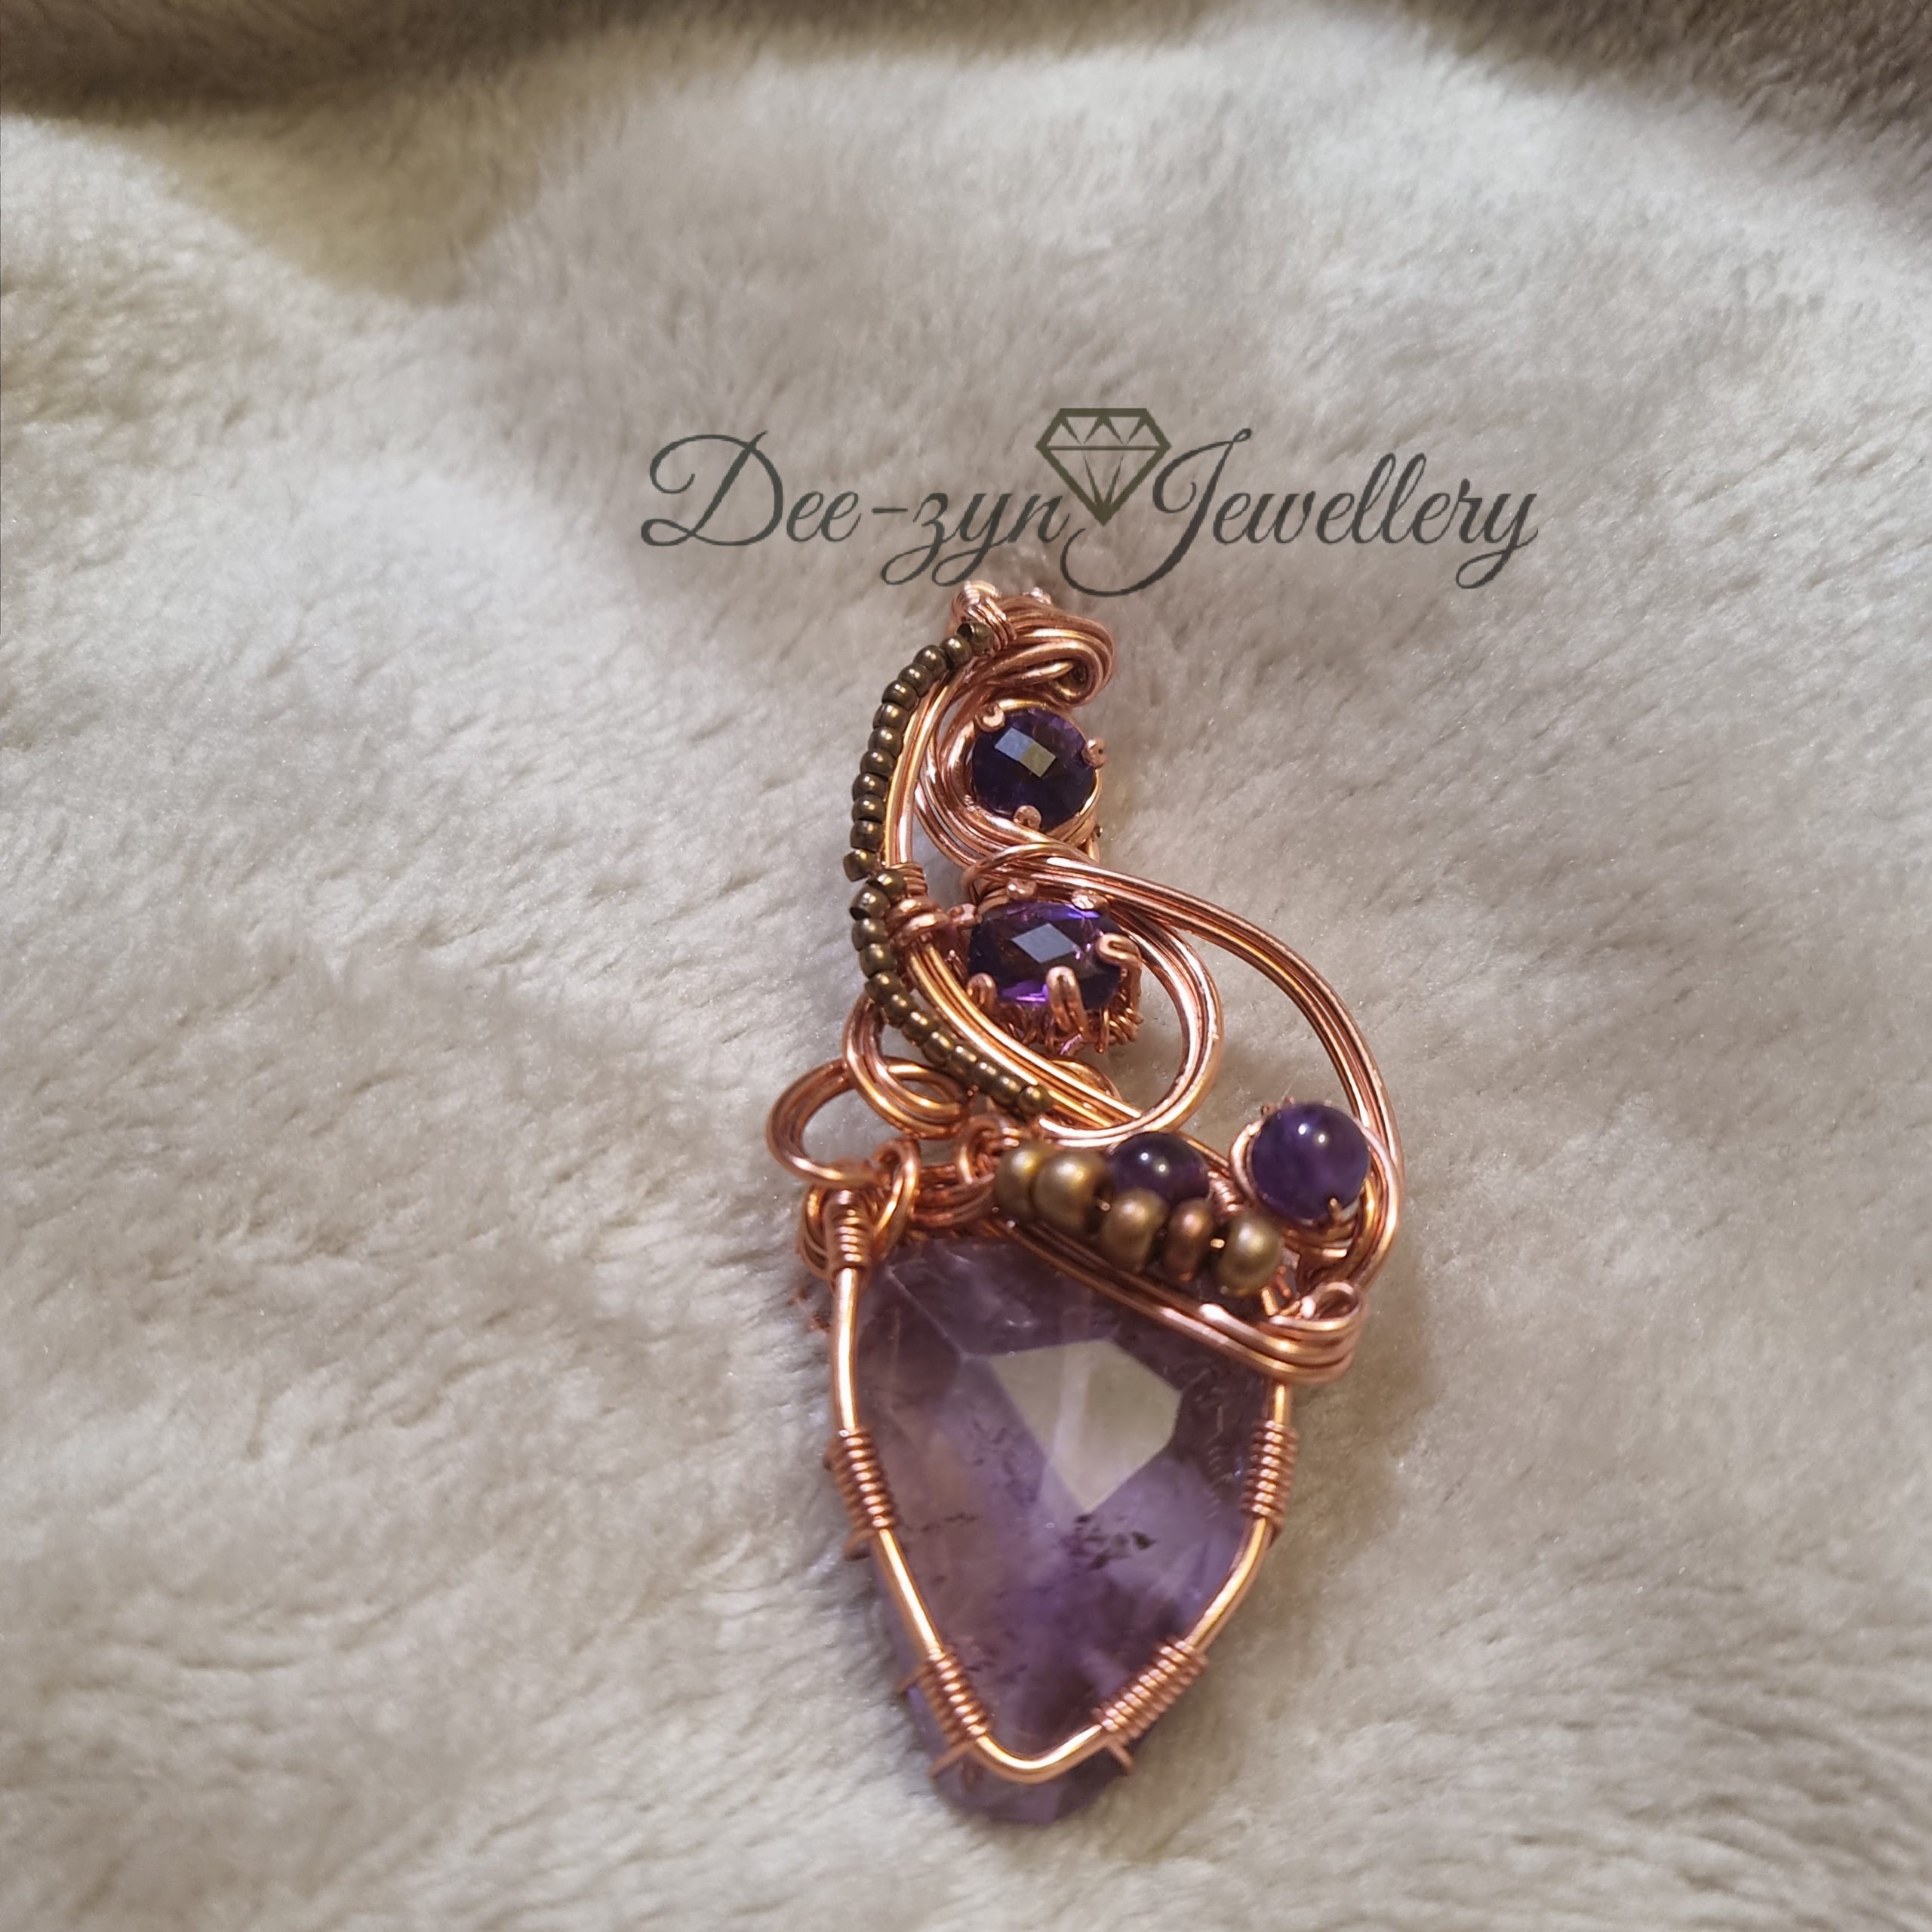 Amethyst Amulet with 5 Amethysts encased in wire on a fur throw.